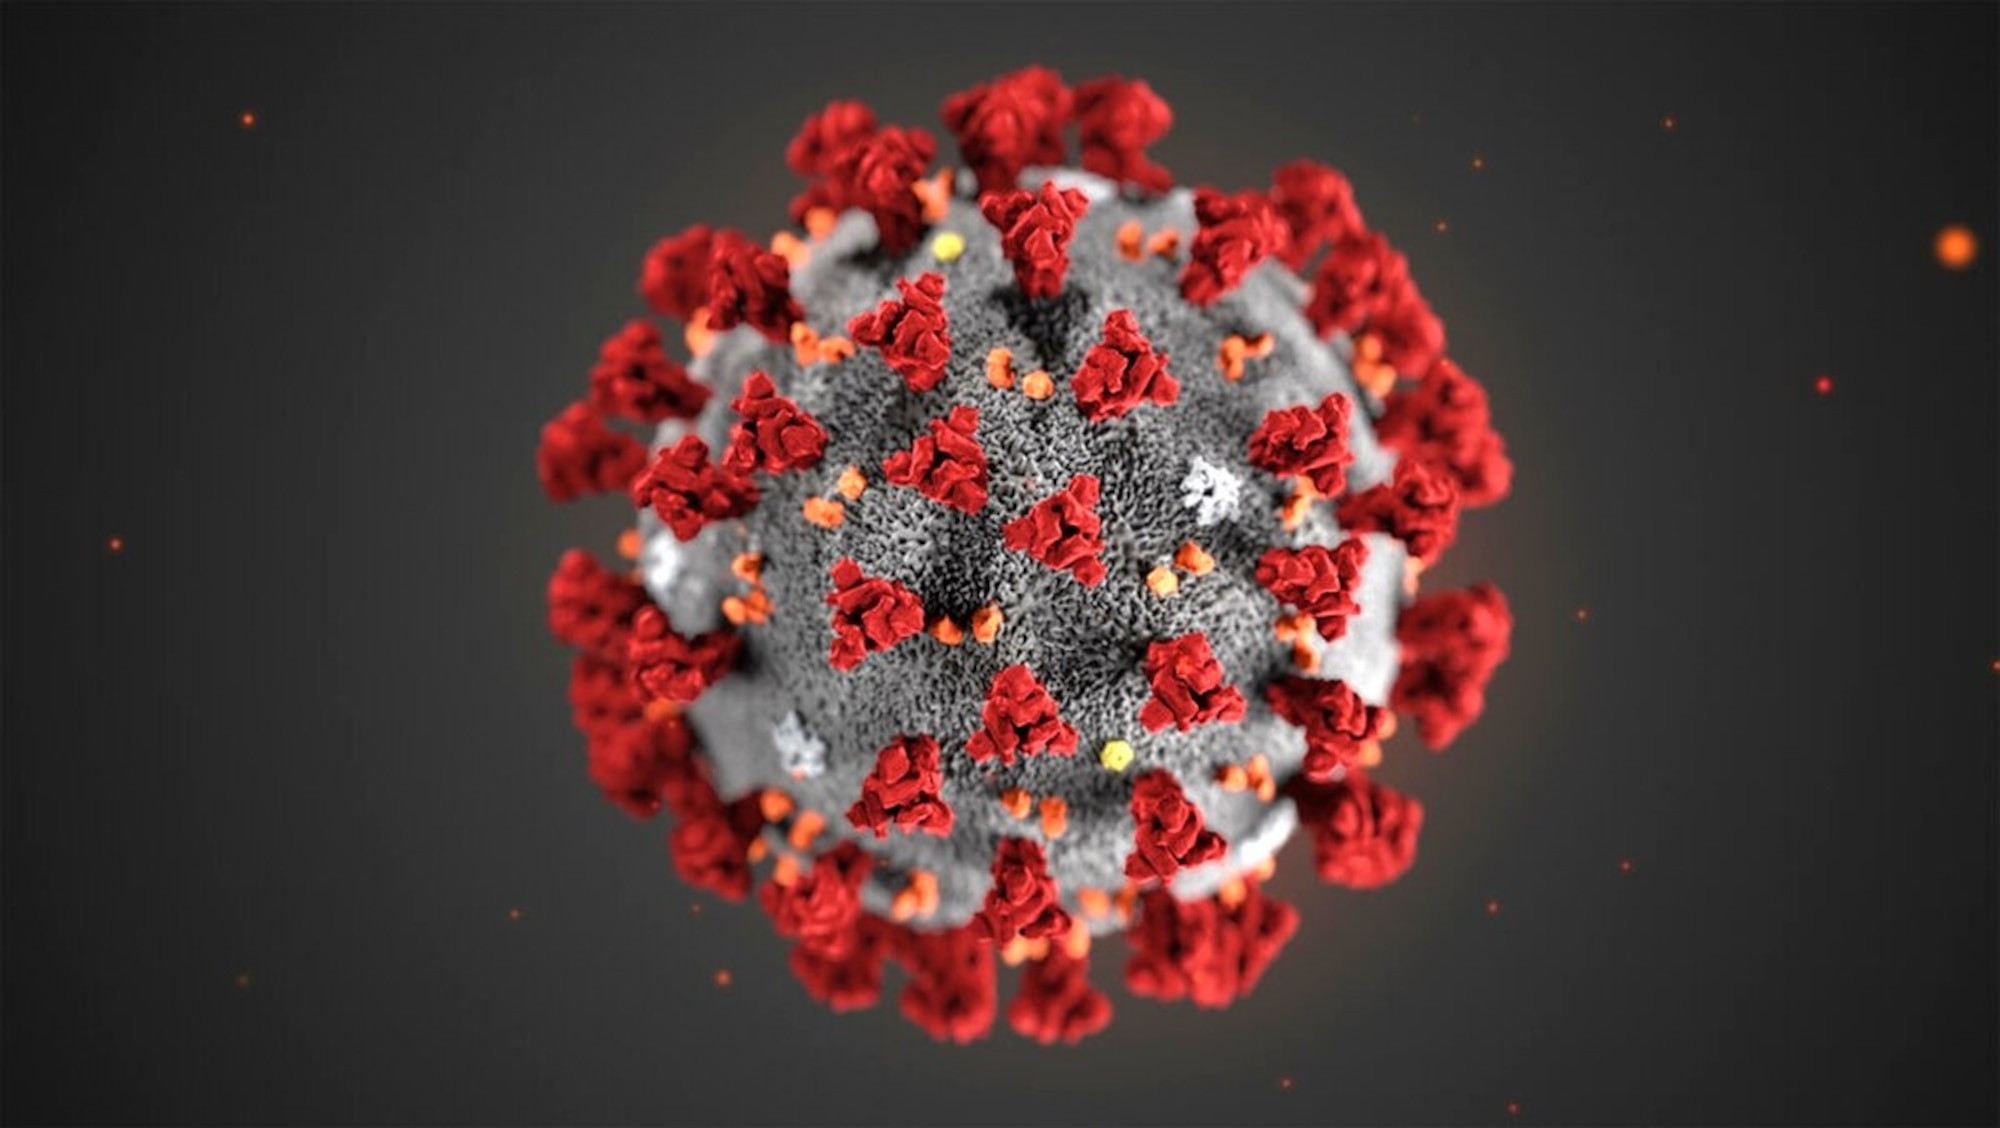 This illustration provided by the Centers for Disease Control and Prevention (CDC) in January 2020 shows the 2019 Novel Coronavirus (2019-nCoV). (CDC via AP)